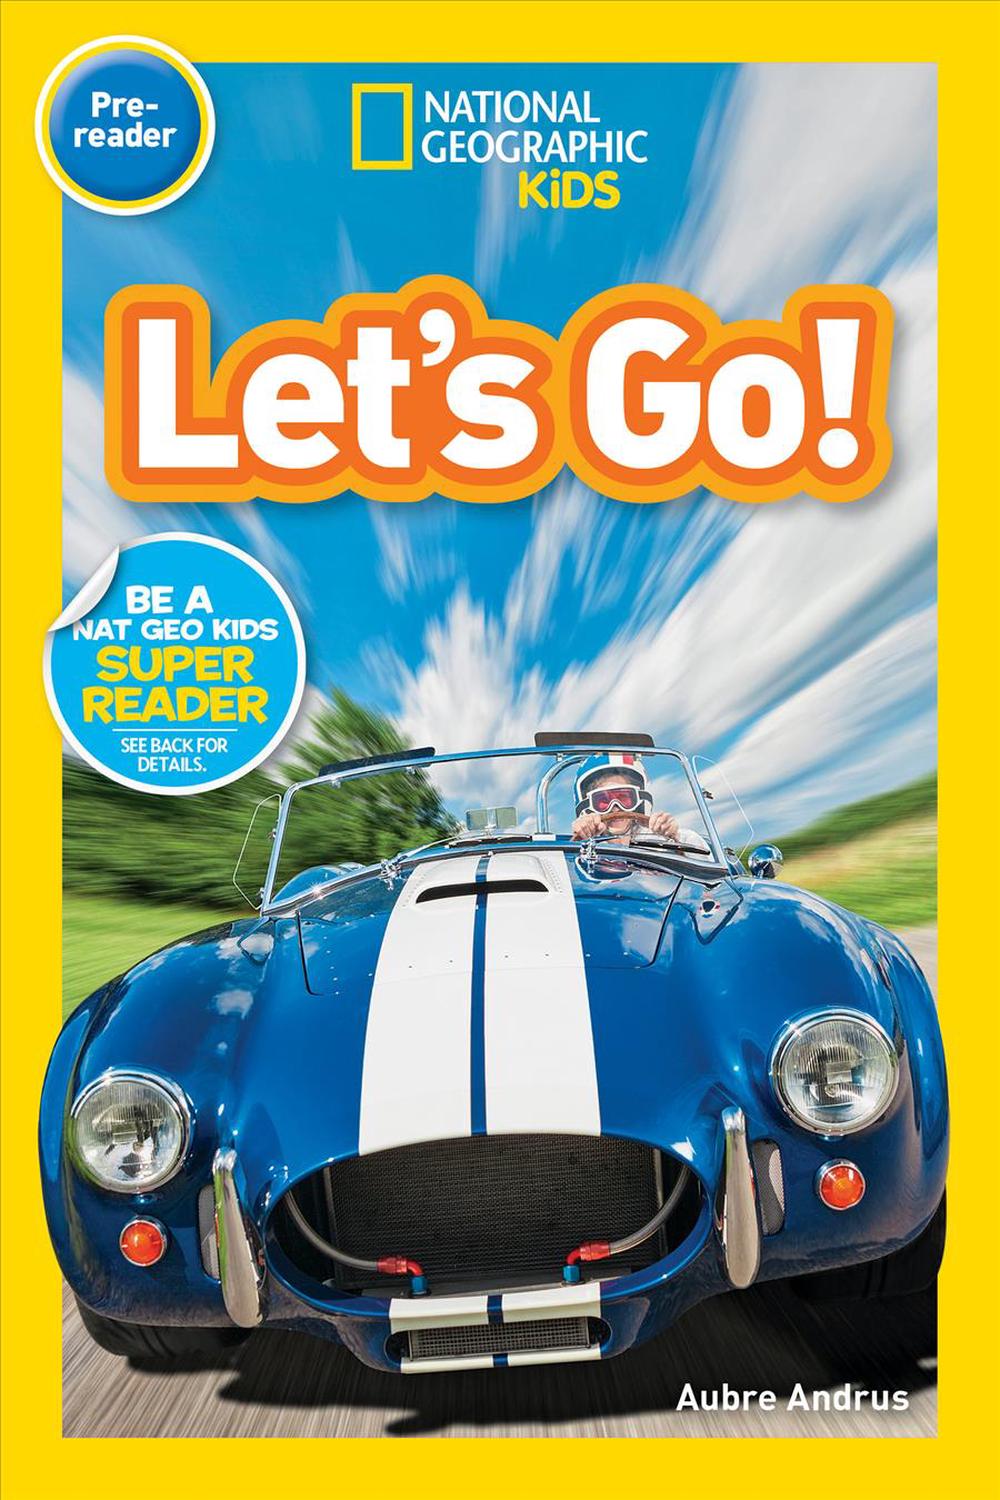 National Geographic Readers: Let's Go! (Pre-Reader) by Aubre Andrus ...